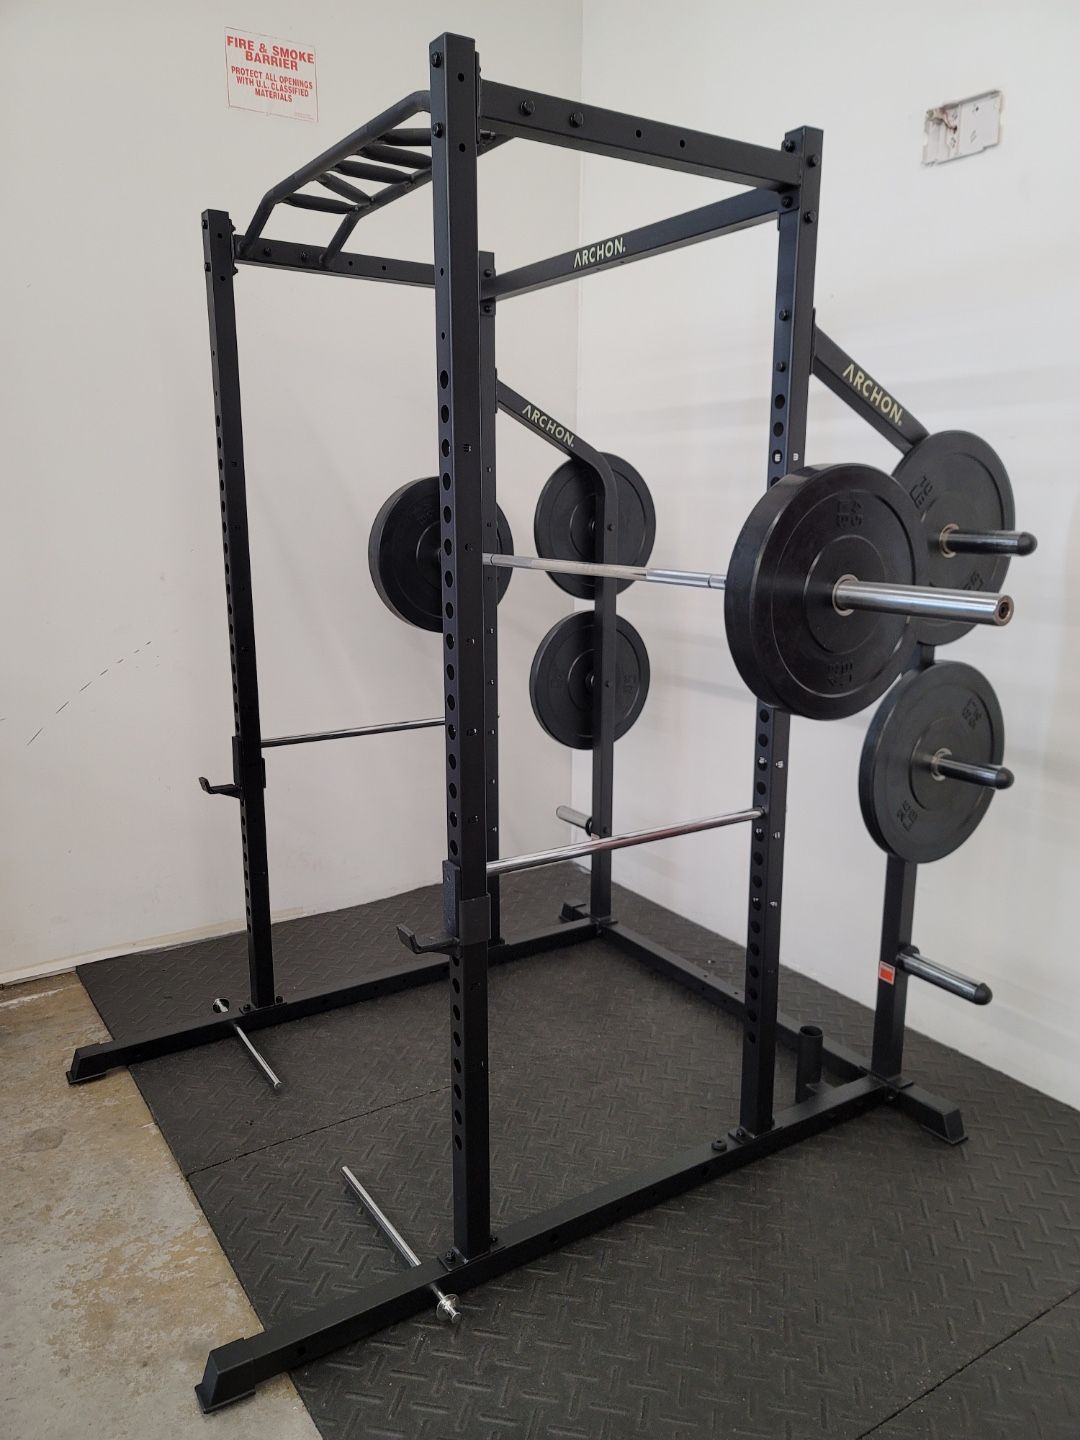 Brand New!! Squat / Power Rack Bumper Plates and Olympic Barbell